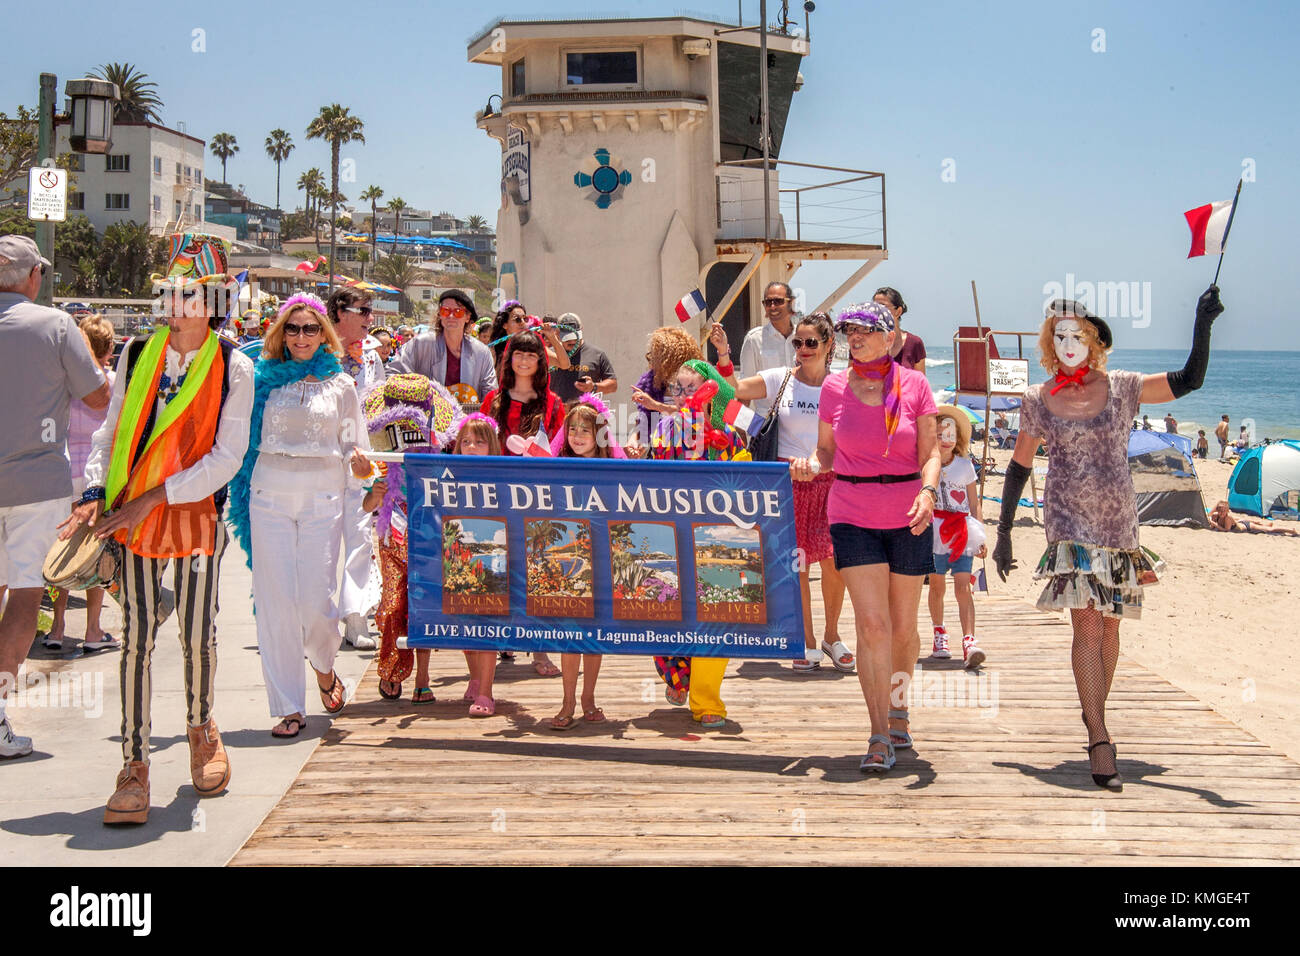 The 'Fete de La Musique' music festival in Laguna Beach, CA, begins with a beach parade accompanied by a mime with a French flag in front of the beach's famous Lifeguard Tower. Stock Photo